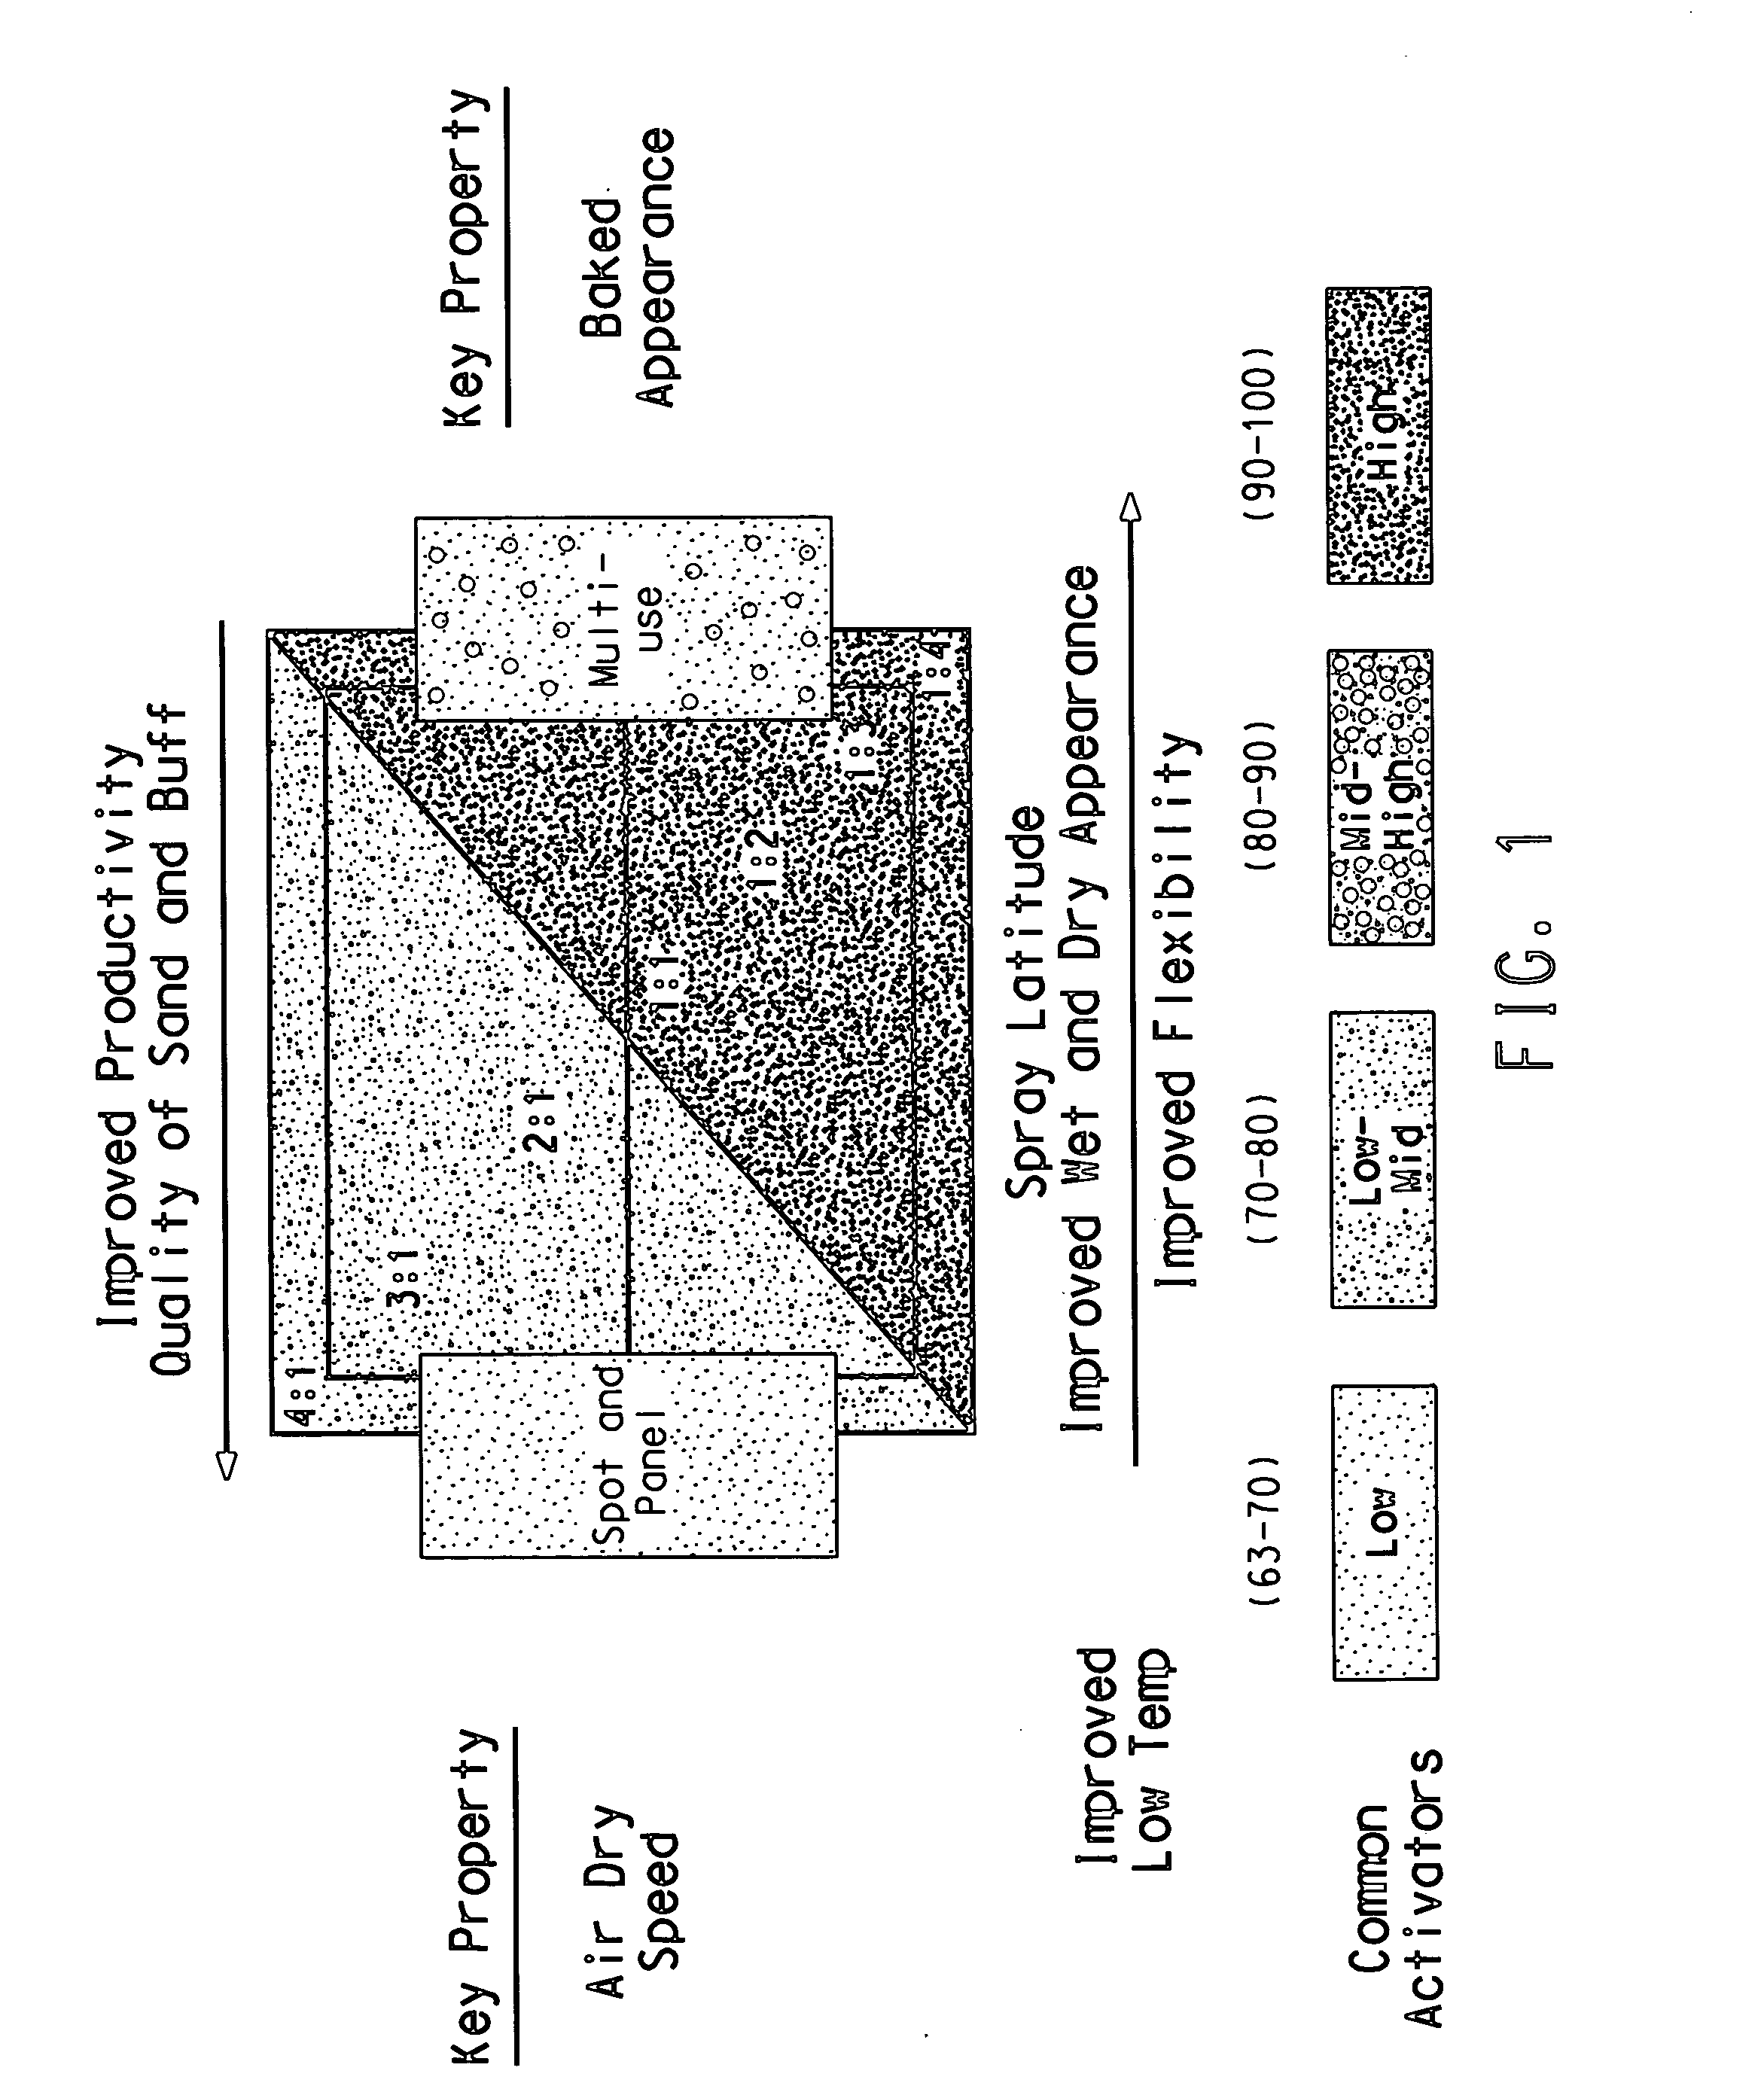 Process for producing coating compositions with customizable properties